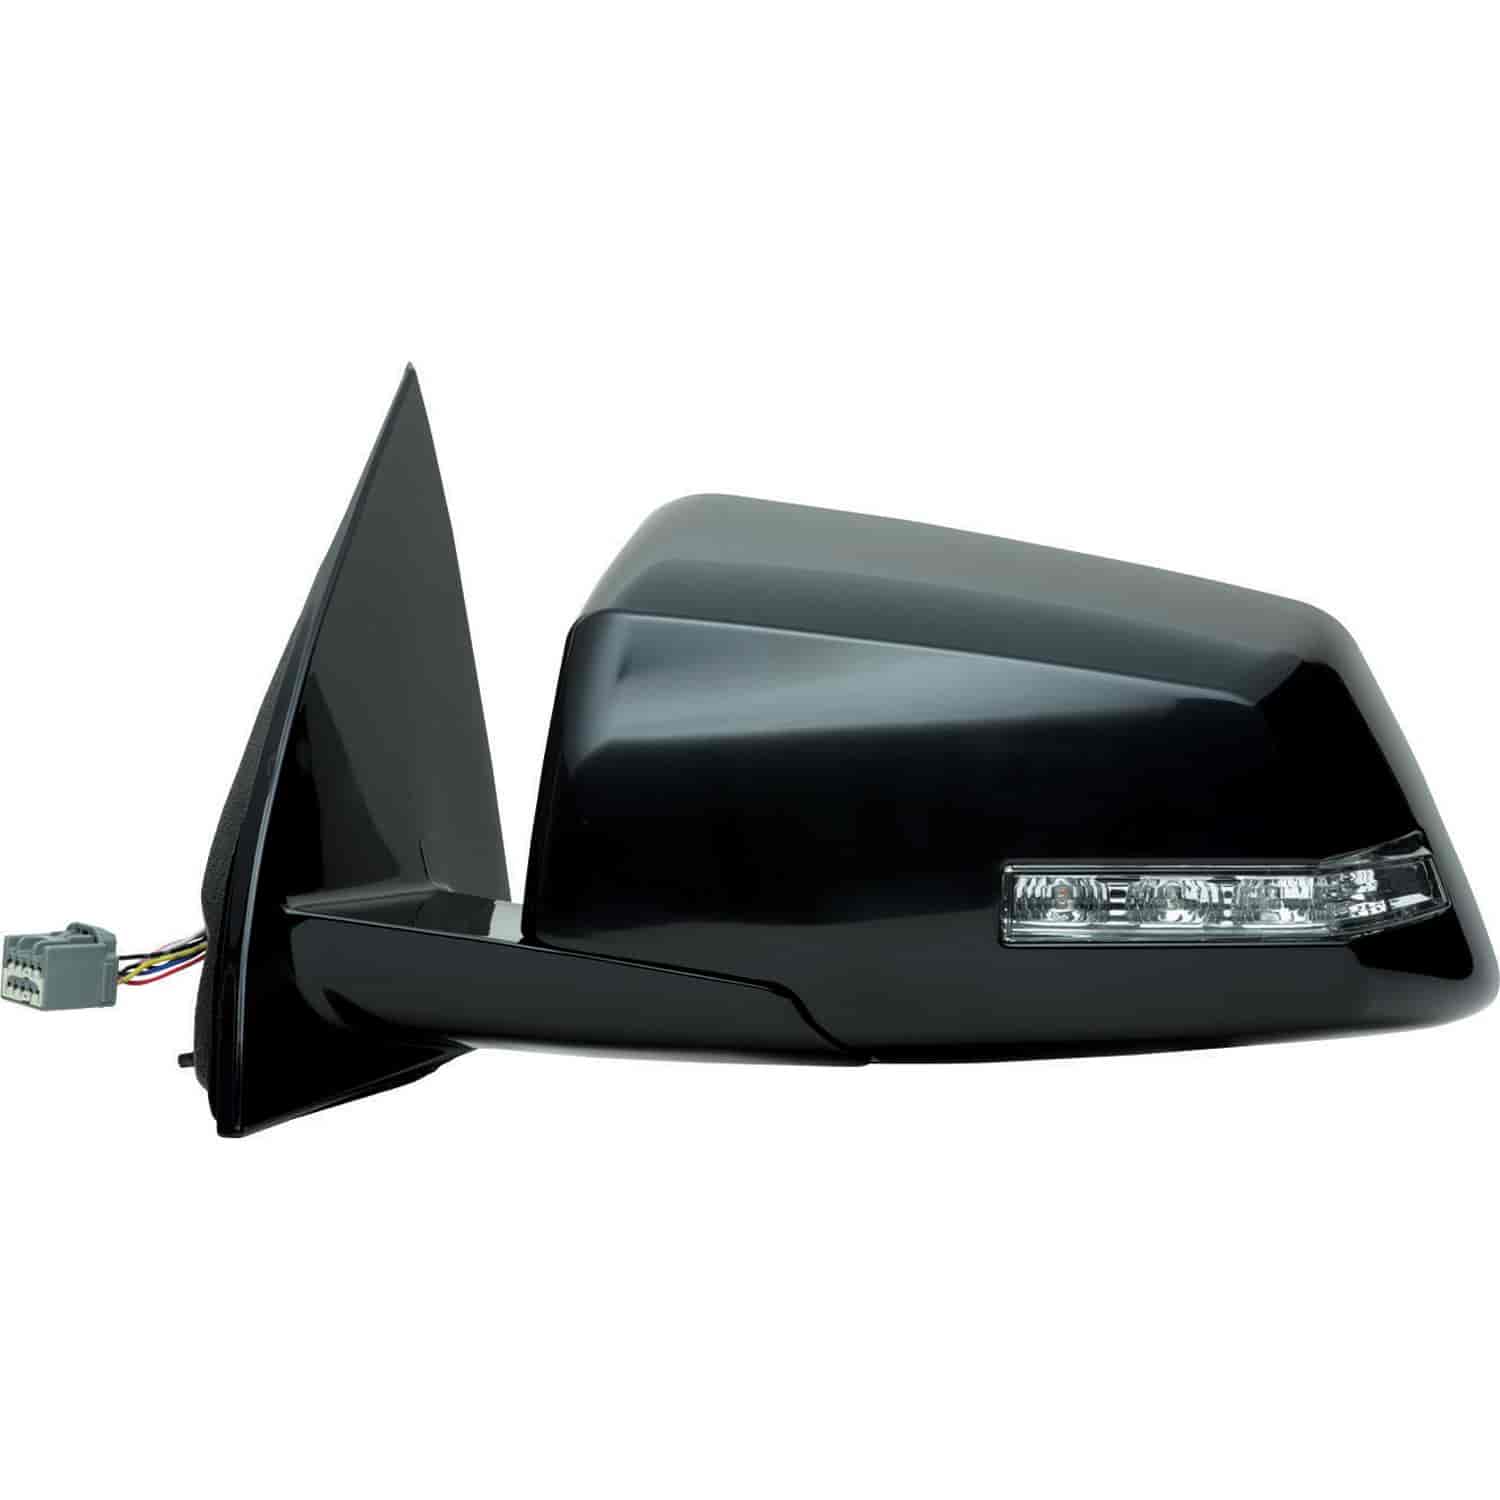 OEM Style Replacement mirror for 09-14 Traverse 07-10